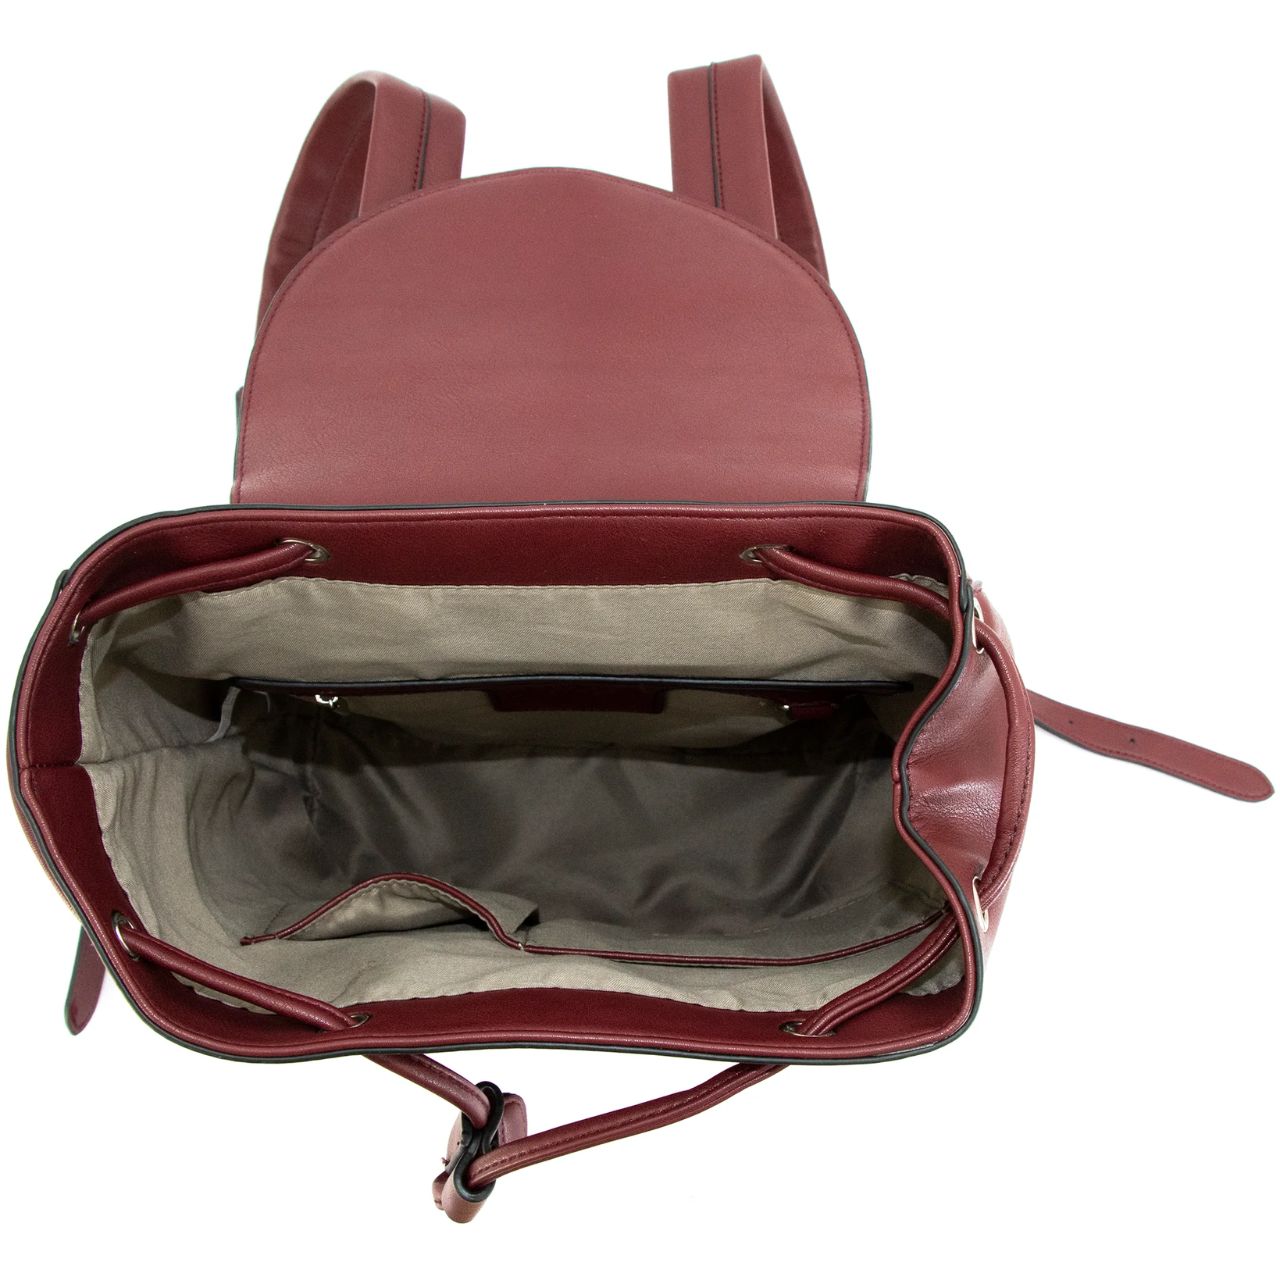 Inside of Maroon colored "Amelia" concealed carry backpack